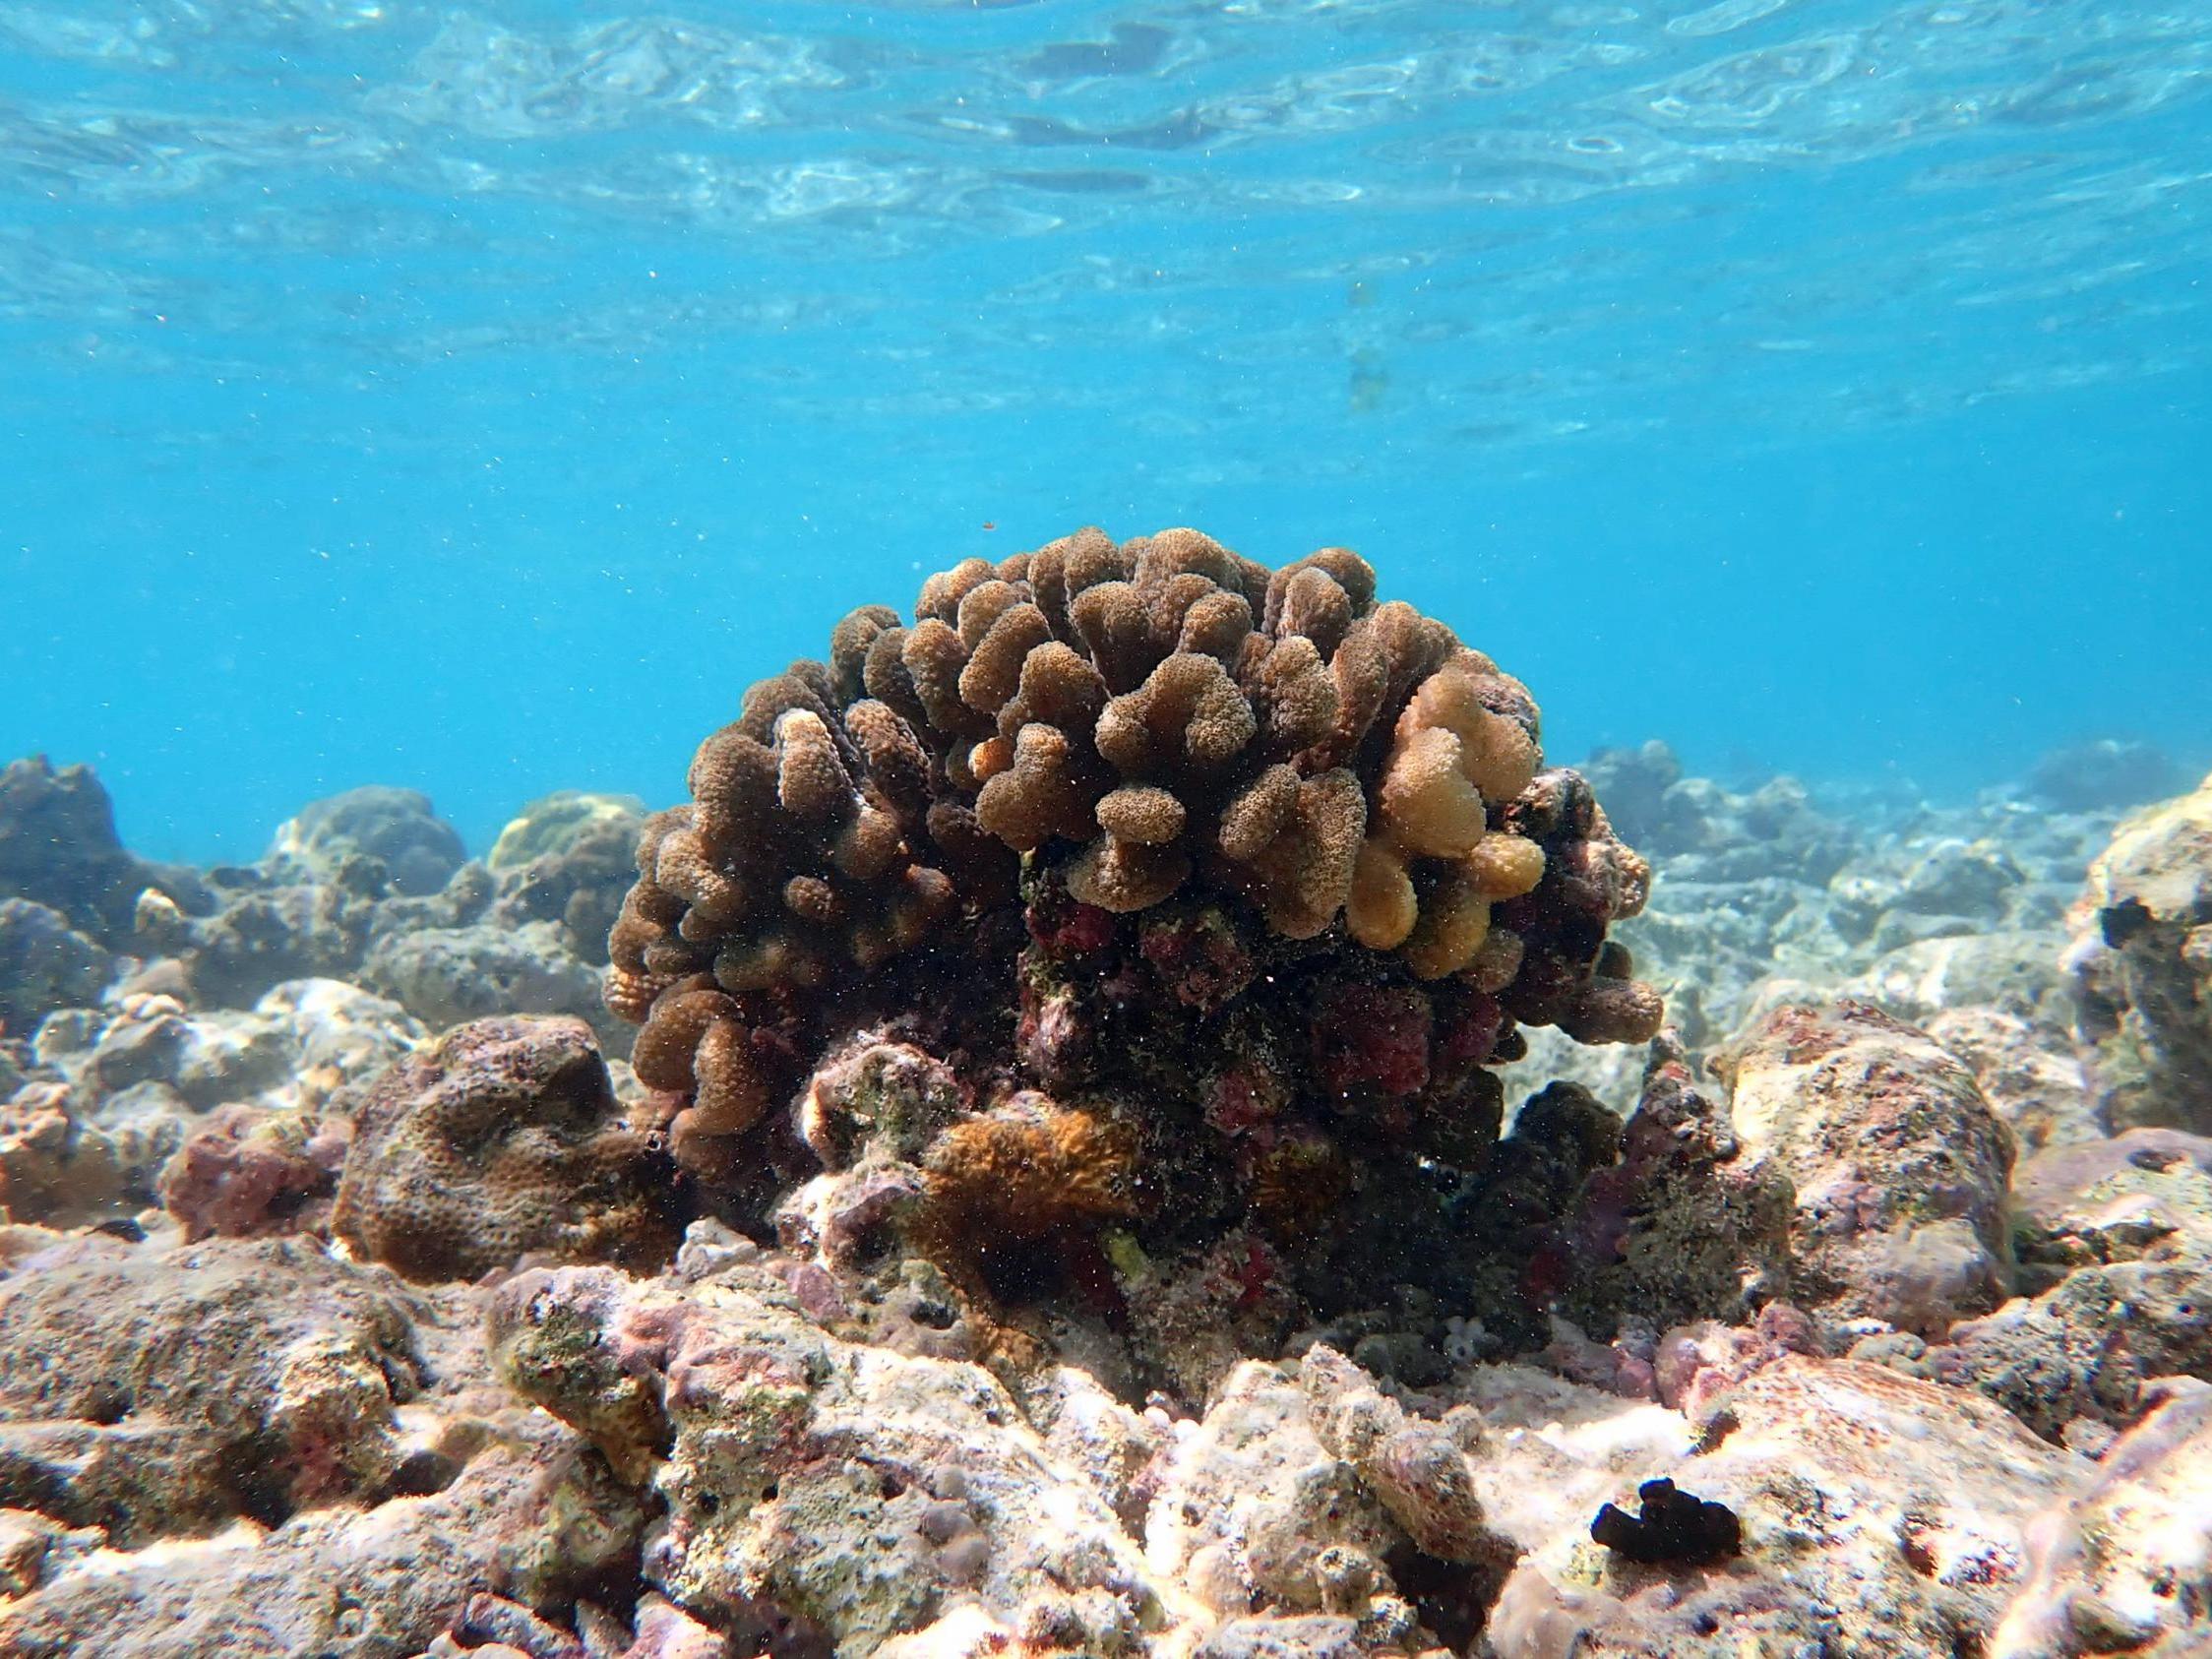 Some parts of the Maldives are believed to have lost up to ninety per cent of corals because of changing conditions such as rising sea water temperature.